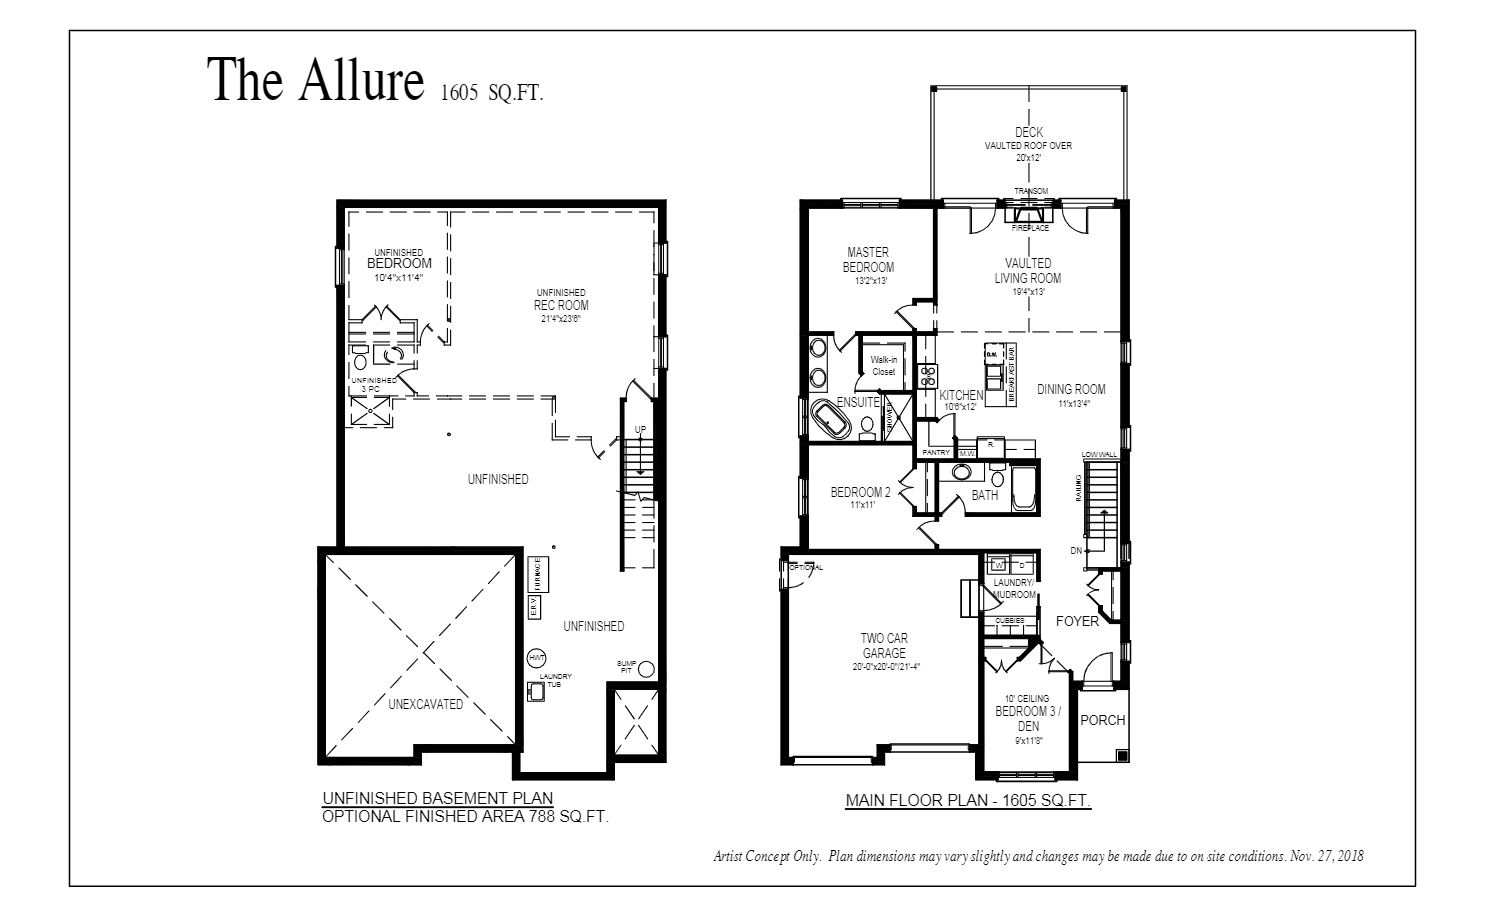  The Allure  Floor Plan of Meadowlily with undefined beds